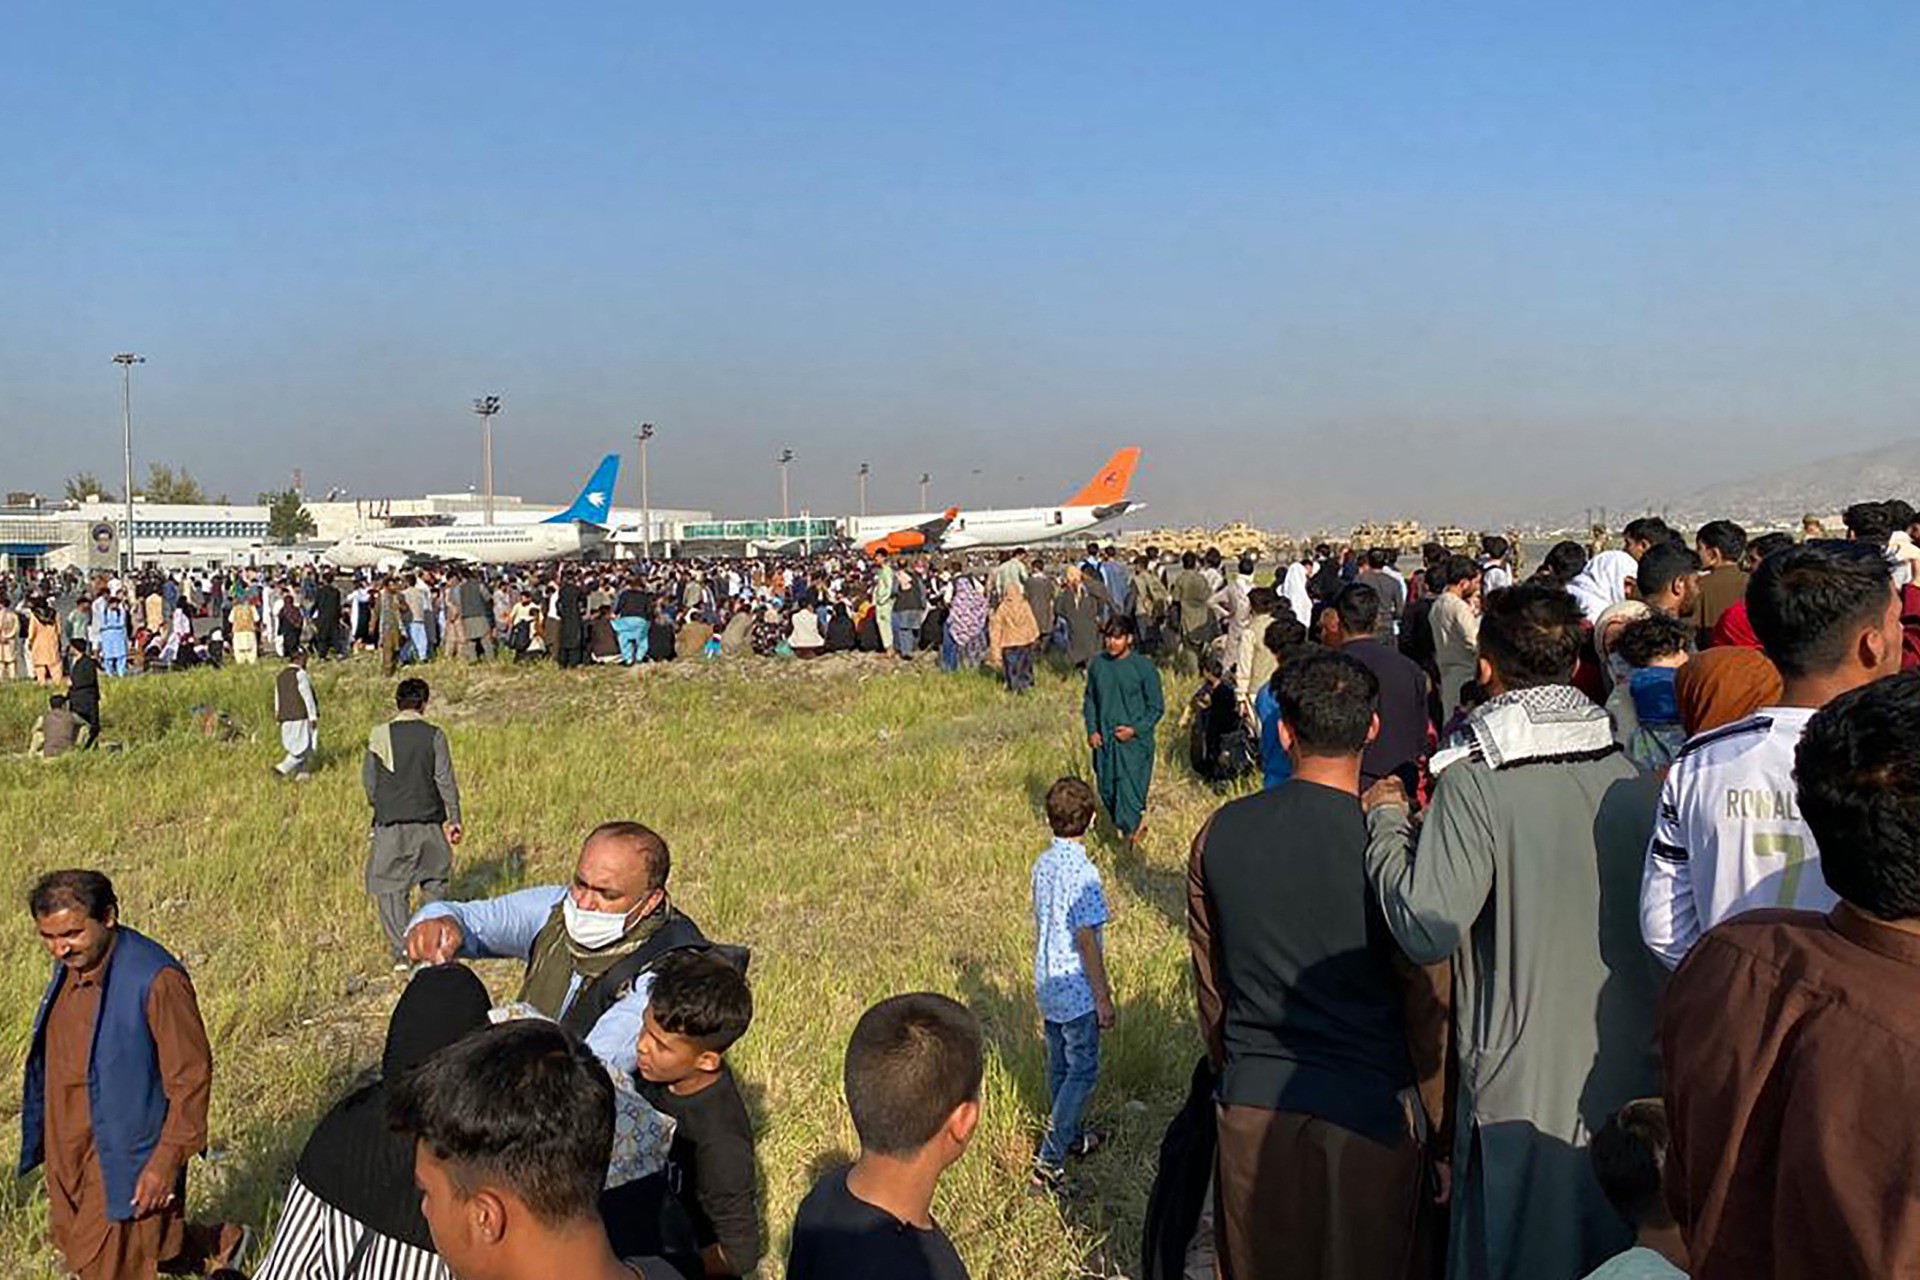 TOPSHOT - Afghans crowd at the airport as they wait to leave from Kabul on August 16, 2021. (Photo by Shakib Rahmani / AFP) (Photo by SHAKIB RAHMANI/AFP via Getty Images)